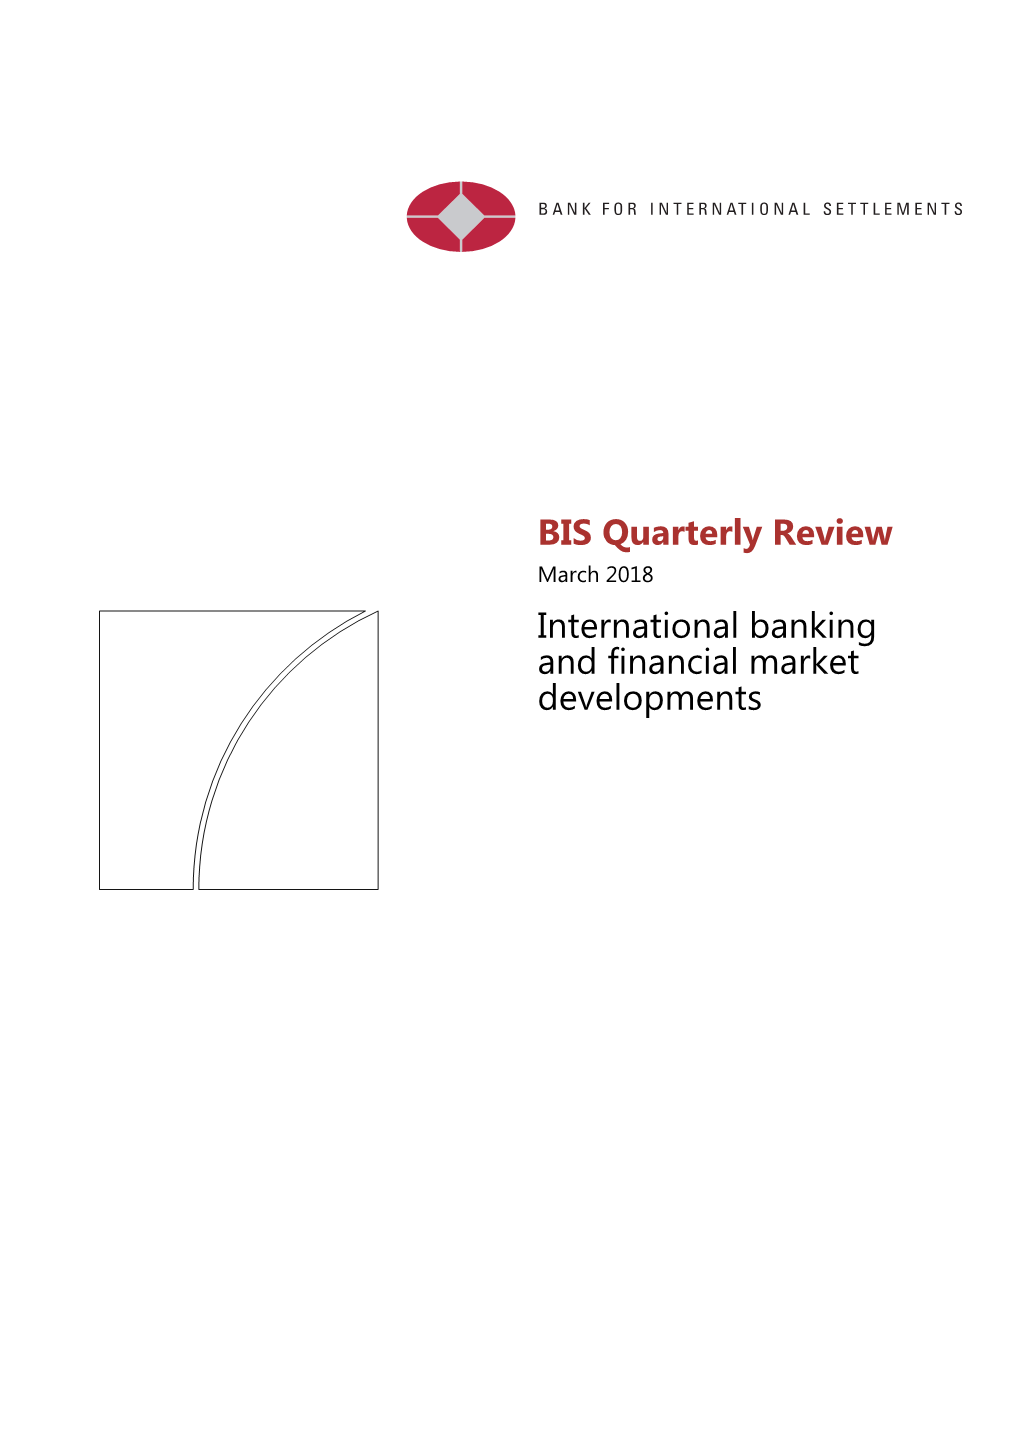 BIS Quarterly Review March 2018 International Banking and Financial Market Developments